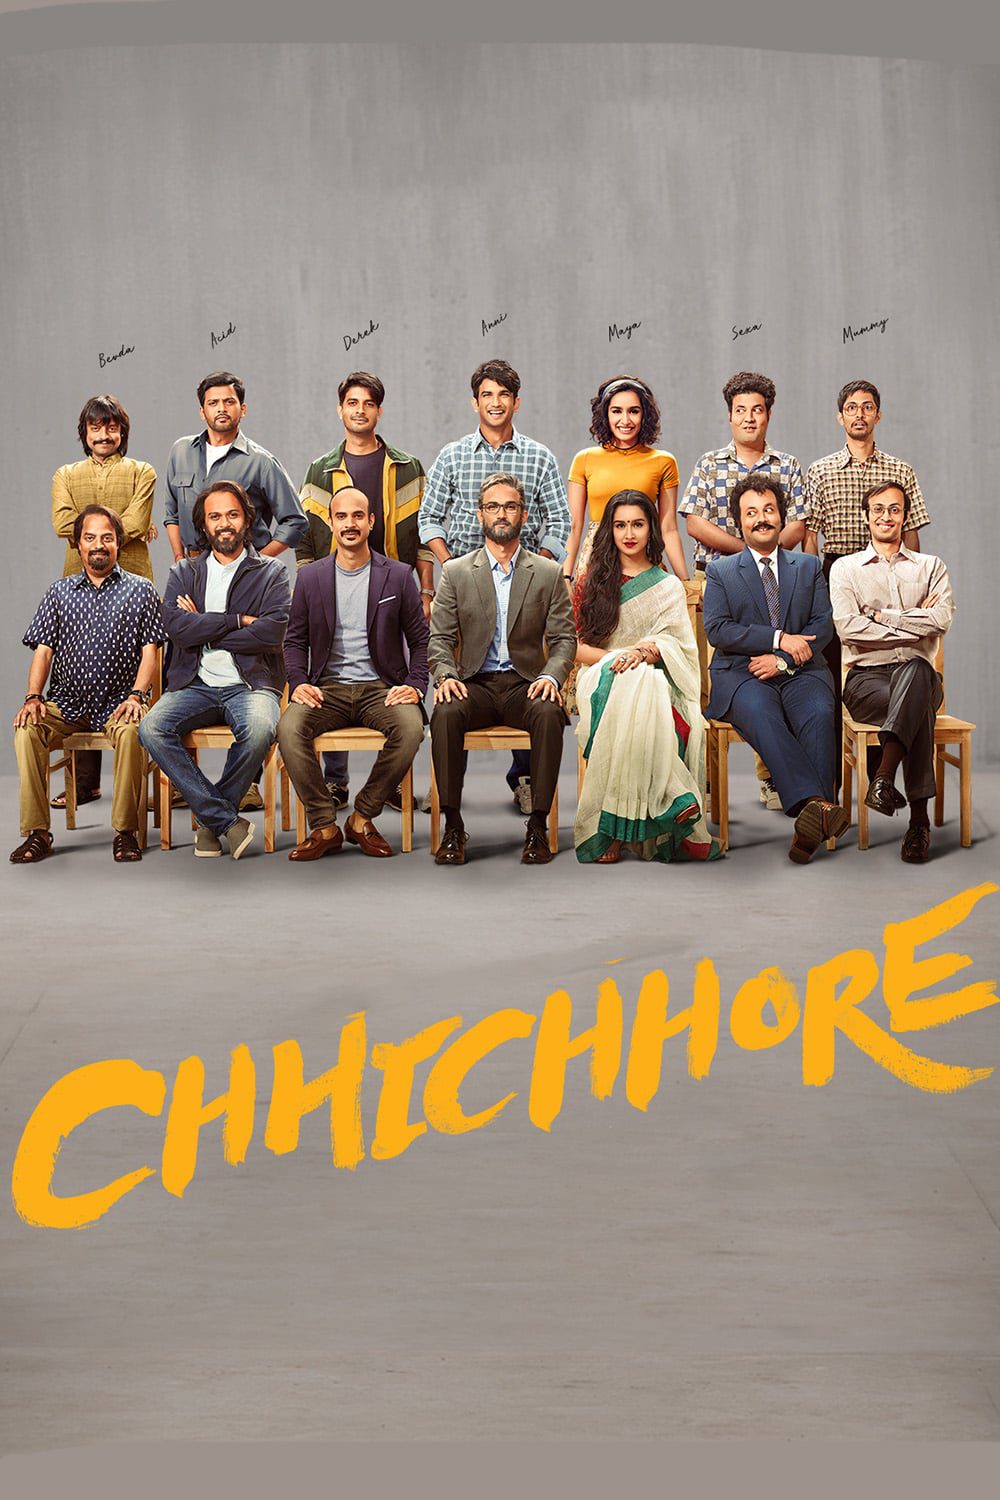 Poster for the movie "Chhichhore"